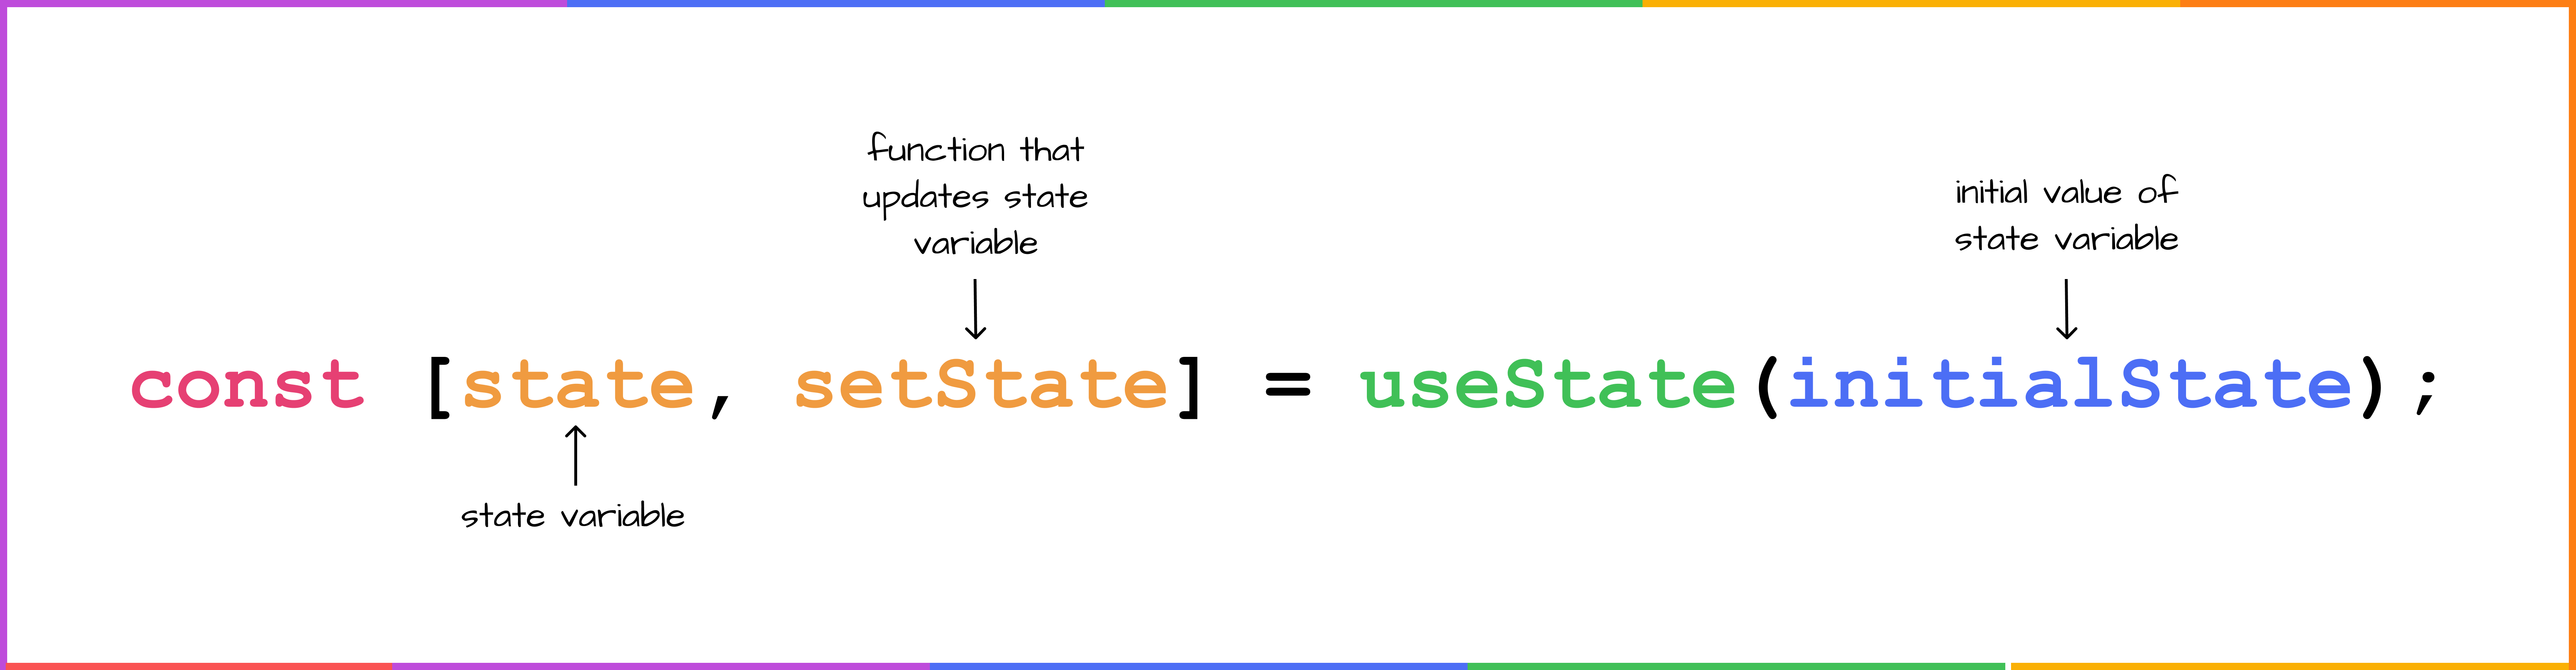 In this line of code: const [state, setState] = useState(initialState); - state is state variable, setState is function that updates state variable, and initialState is initial value of state variable